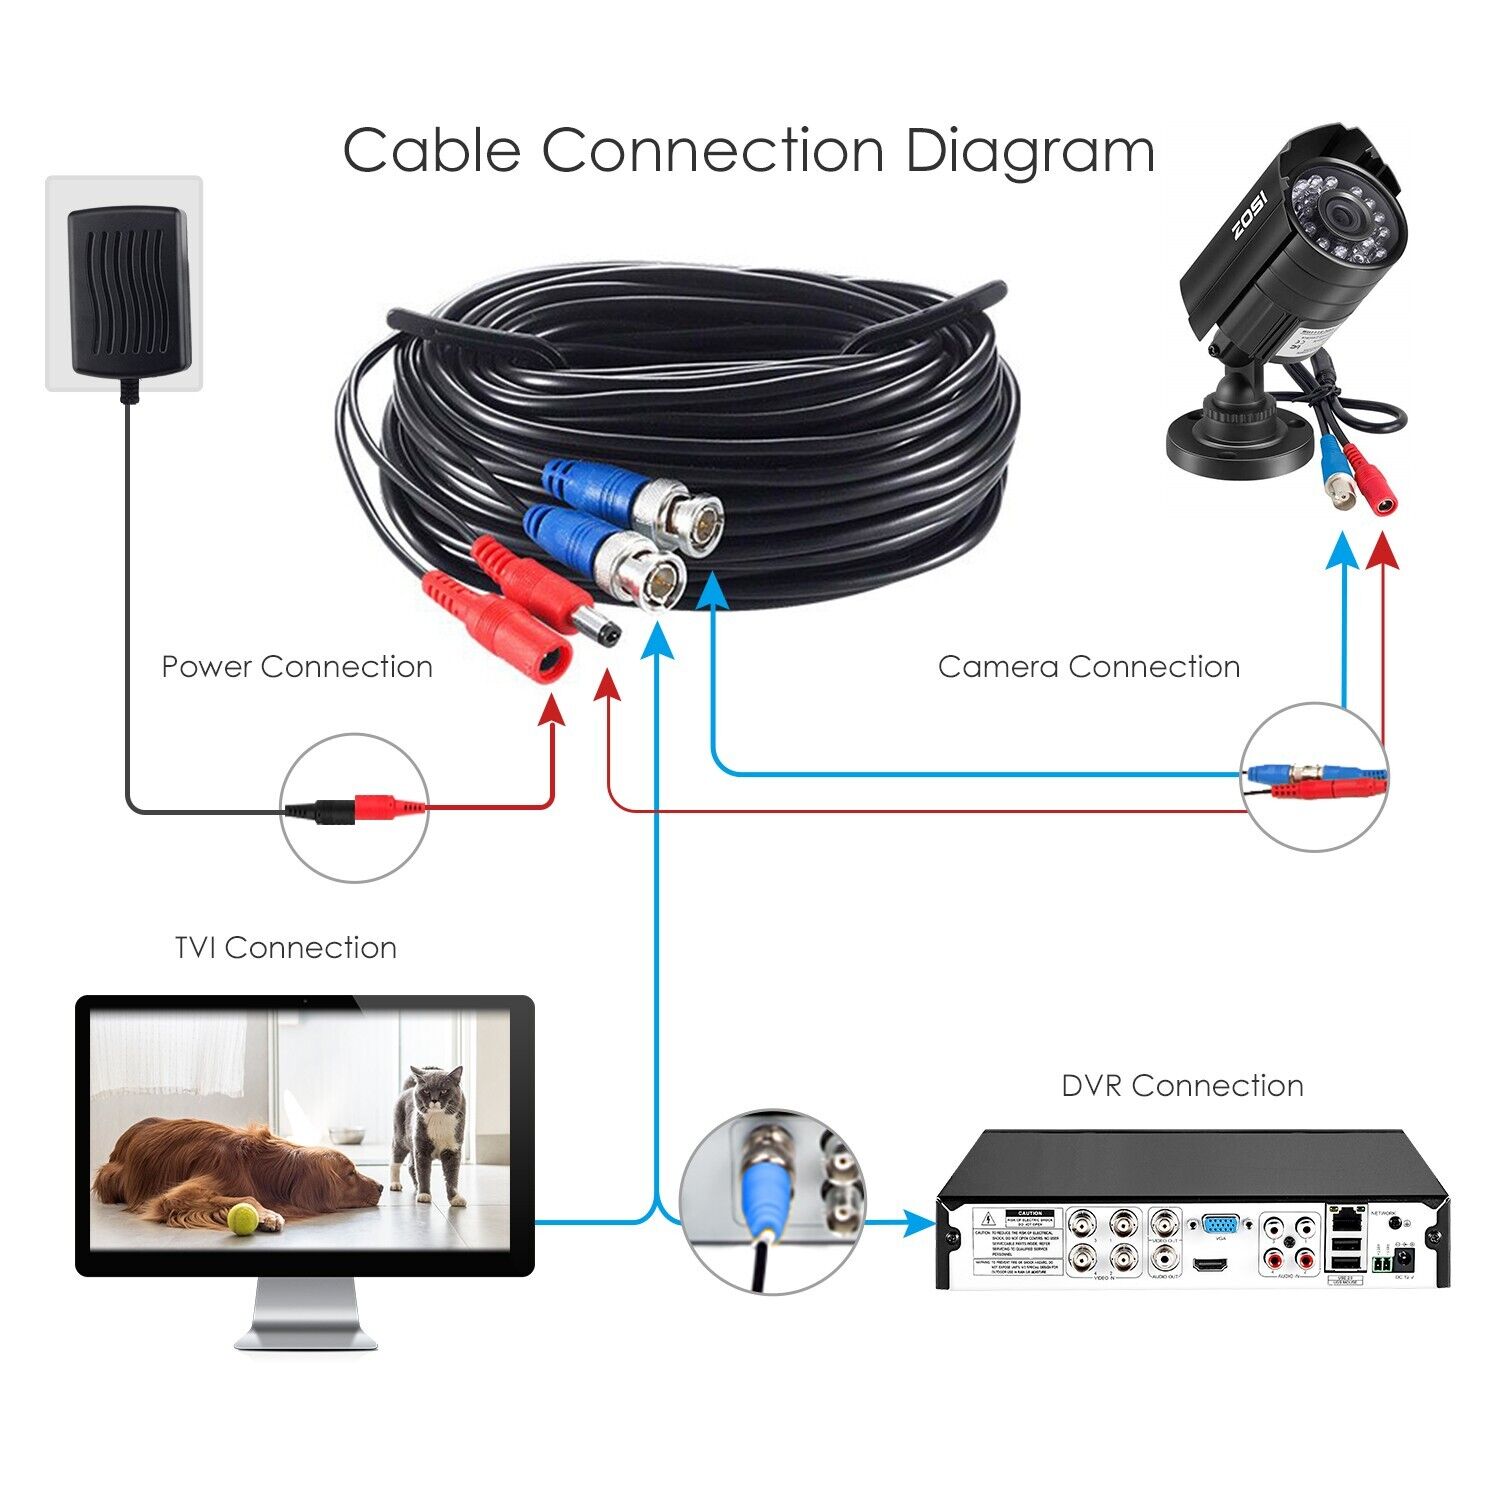 ZOSI 2X 60FT 18M BNC Cable CoopeR Power for 4K CCTV Camera DVR Security System ZOSI Does Not Apply - фотография #5